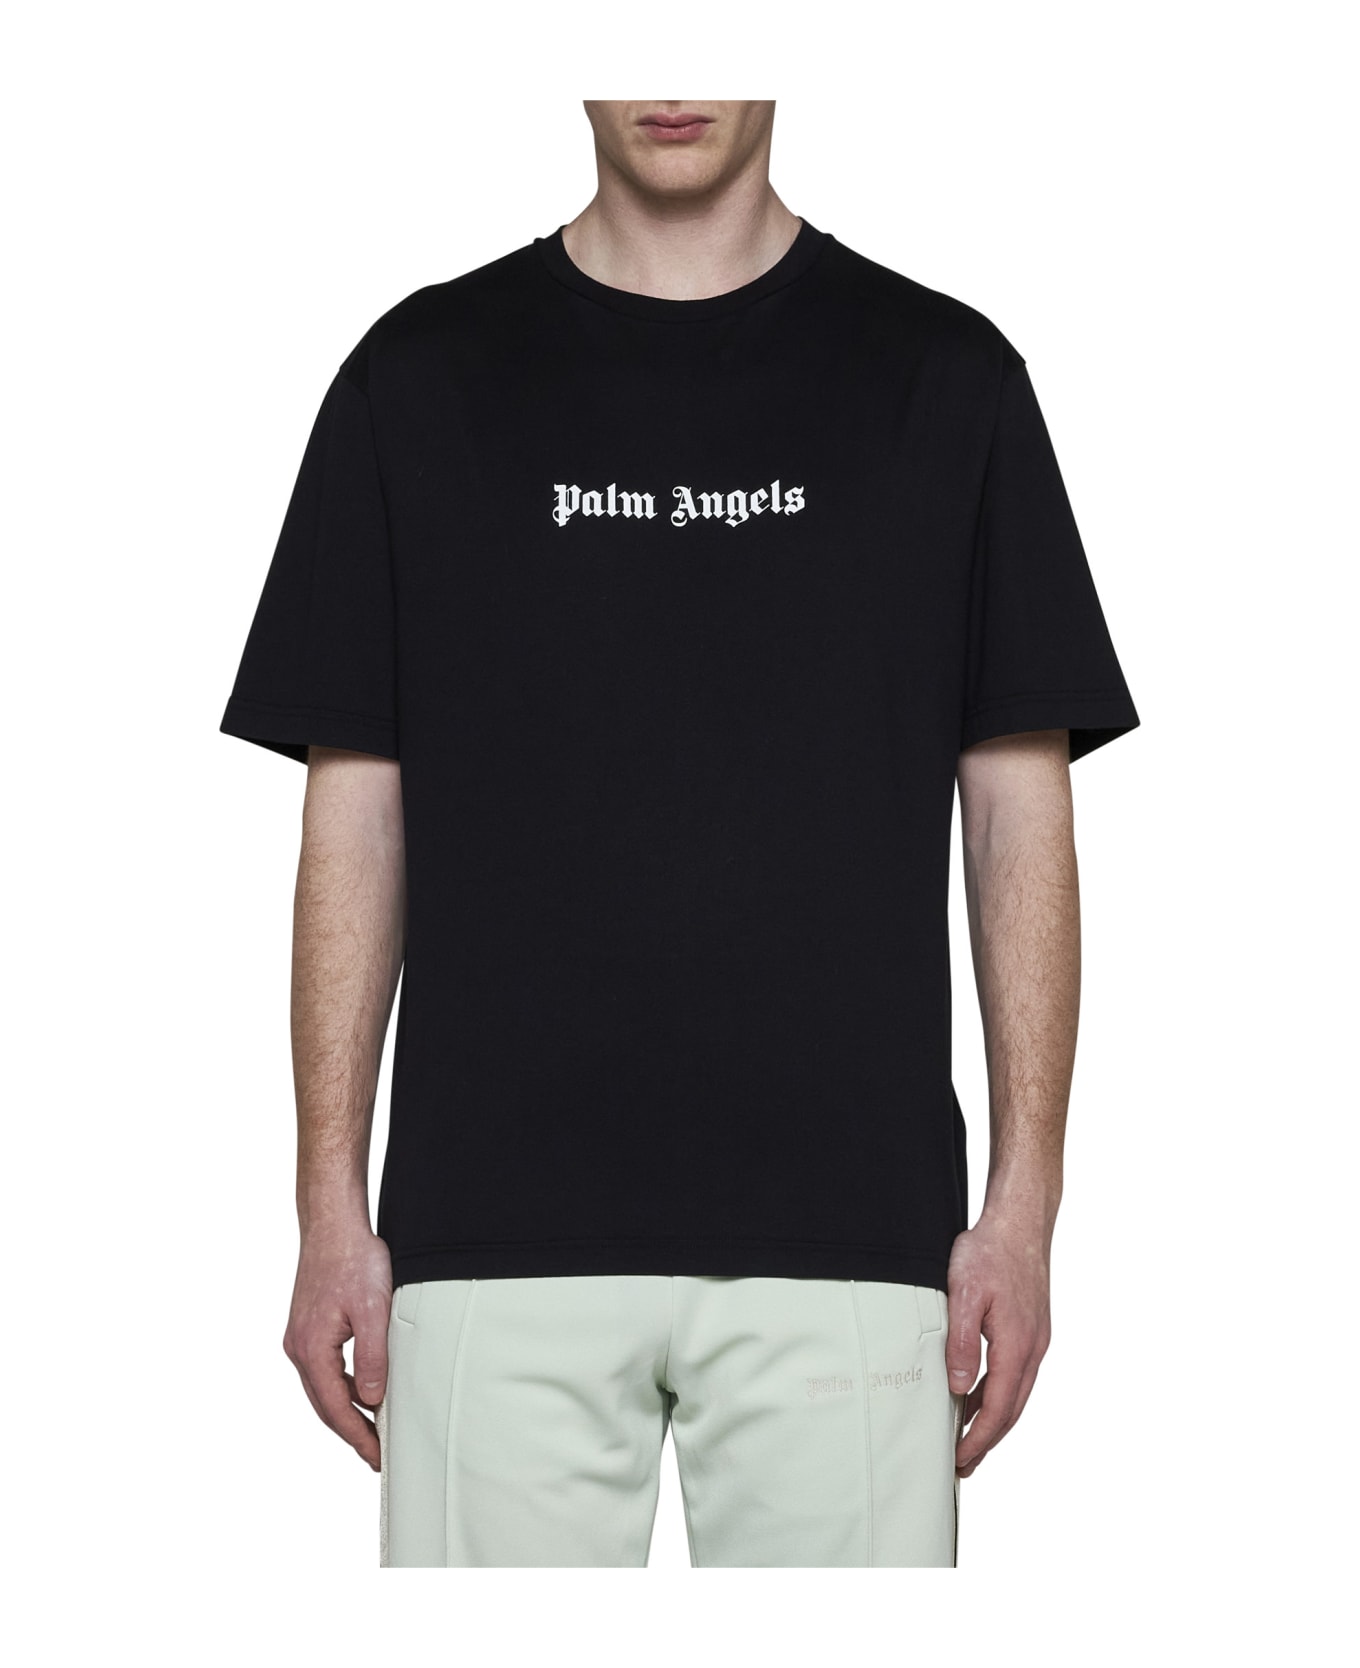 Palm Angels Black T-shirt With Front Logo - Black シャツ